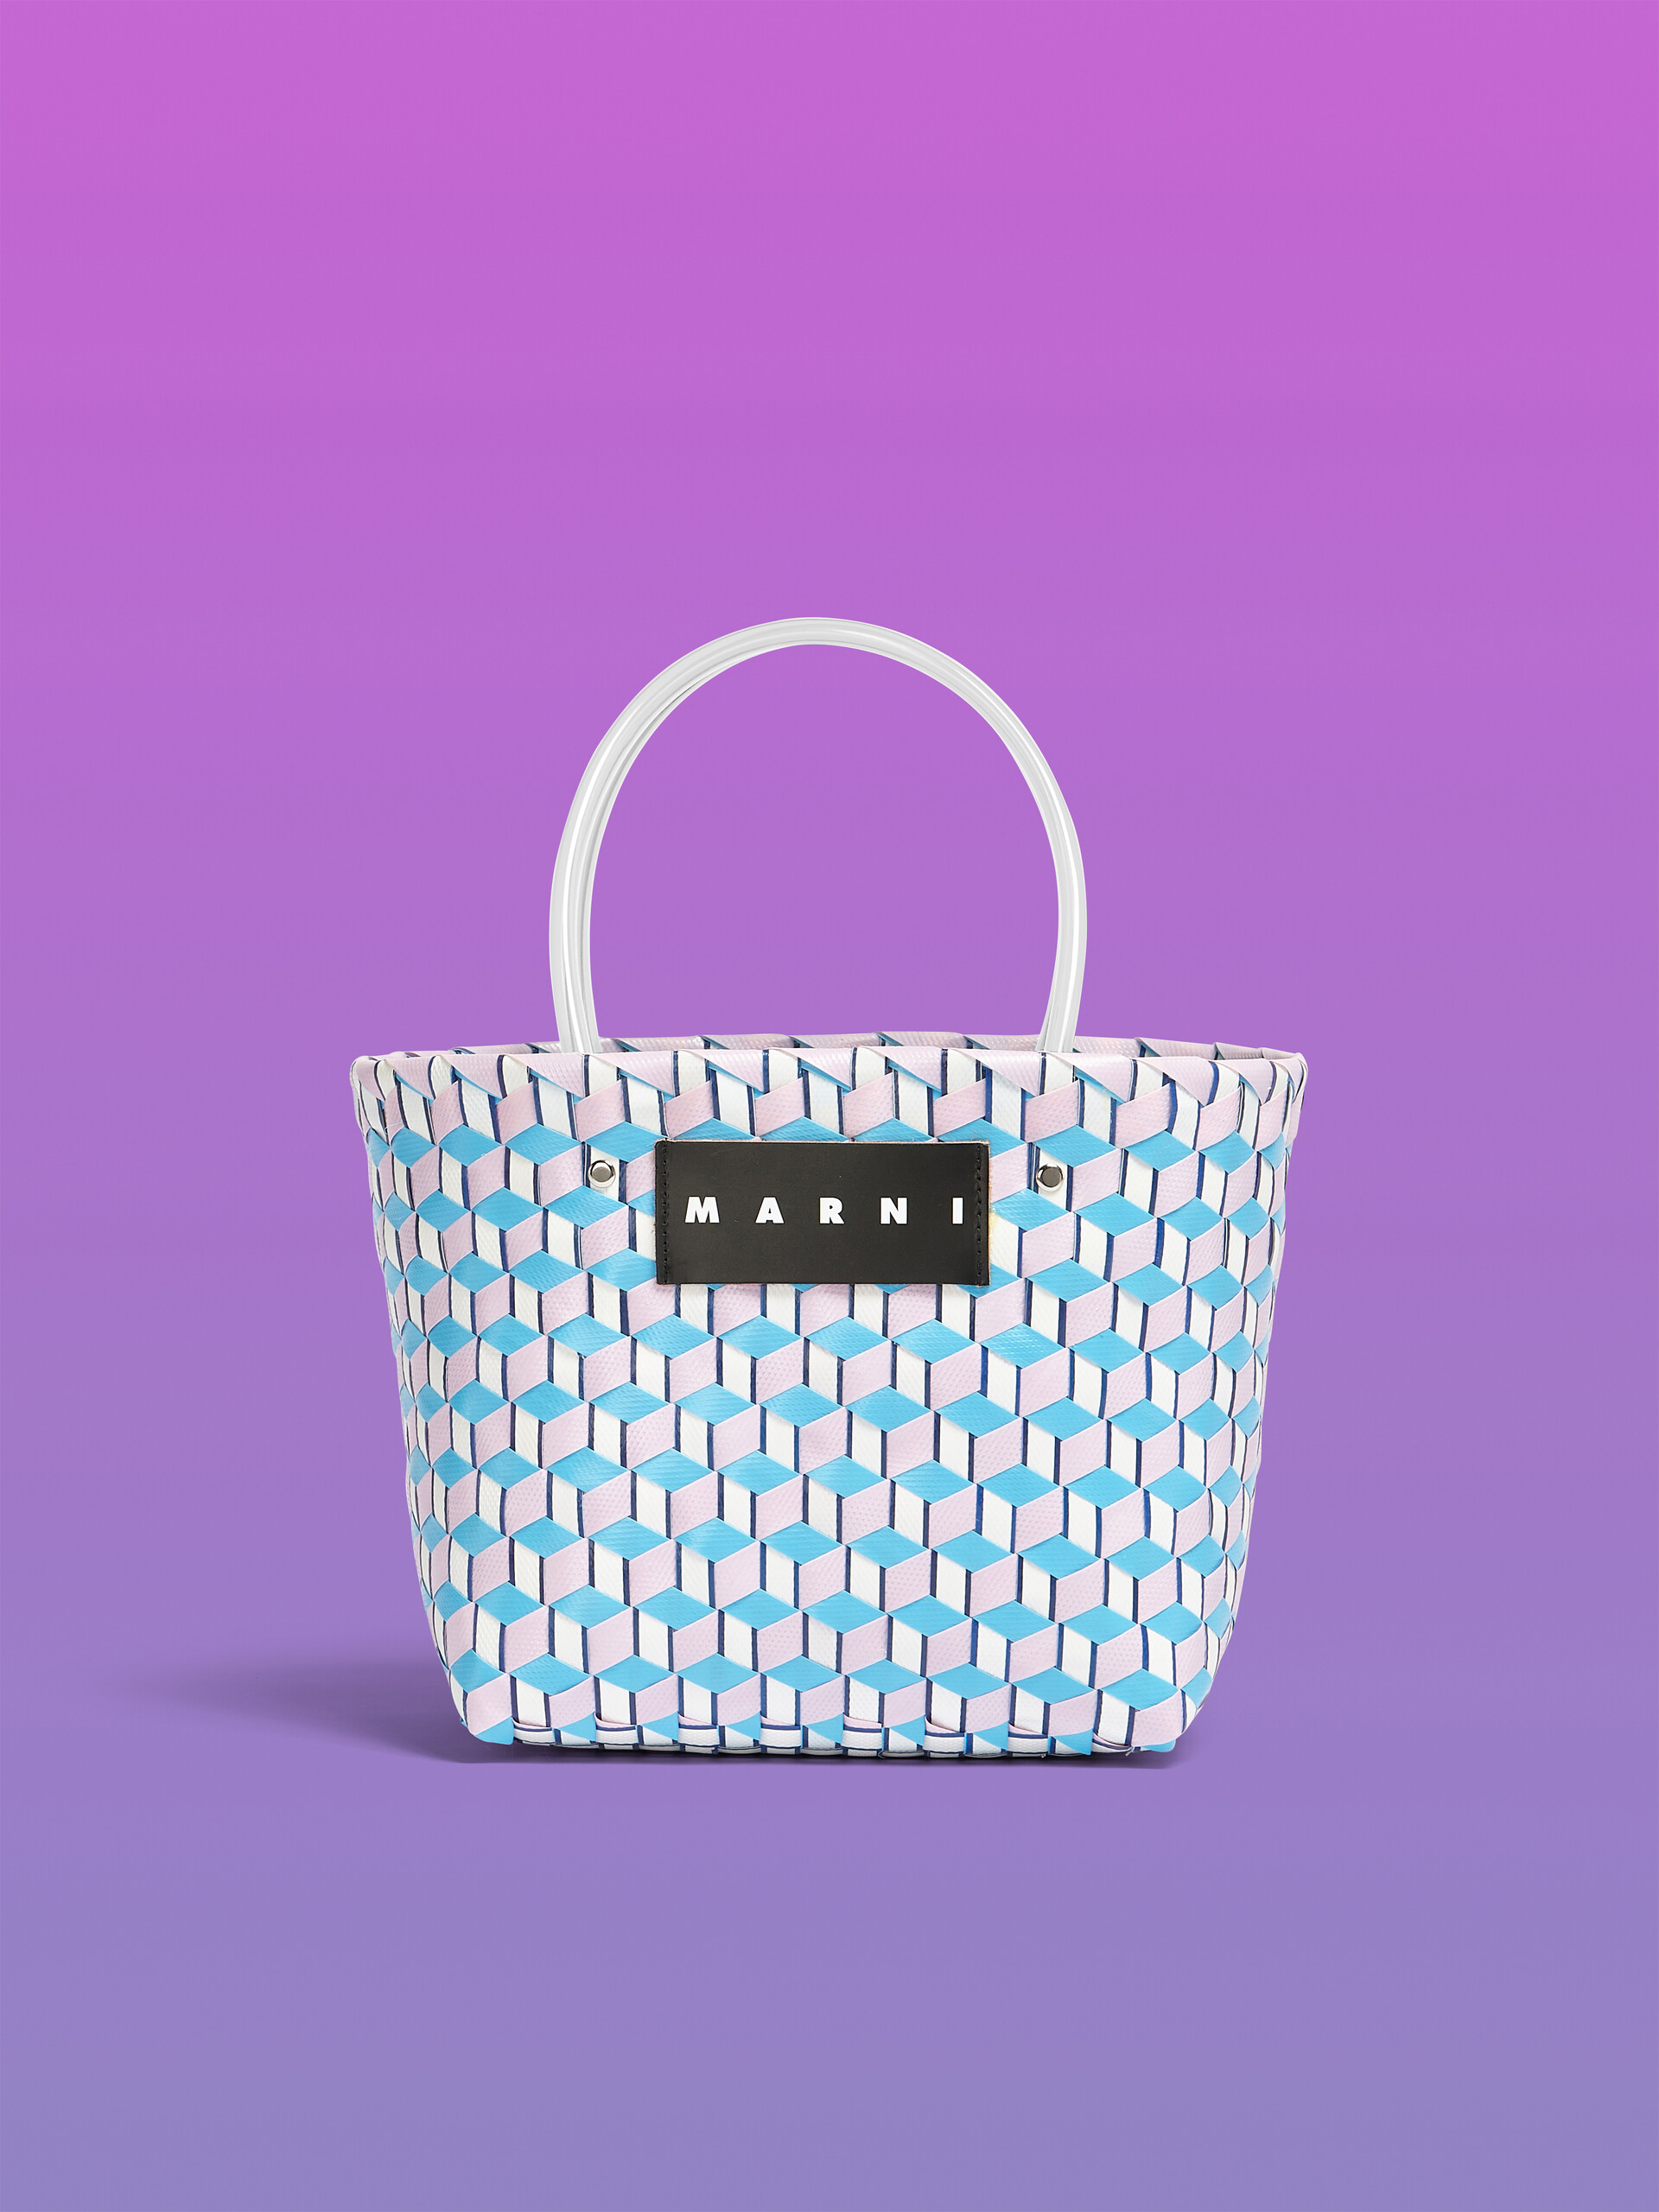 MARNI MARKET 3D BAG in pale blue cube woven material - Bags - Image 1